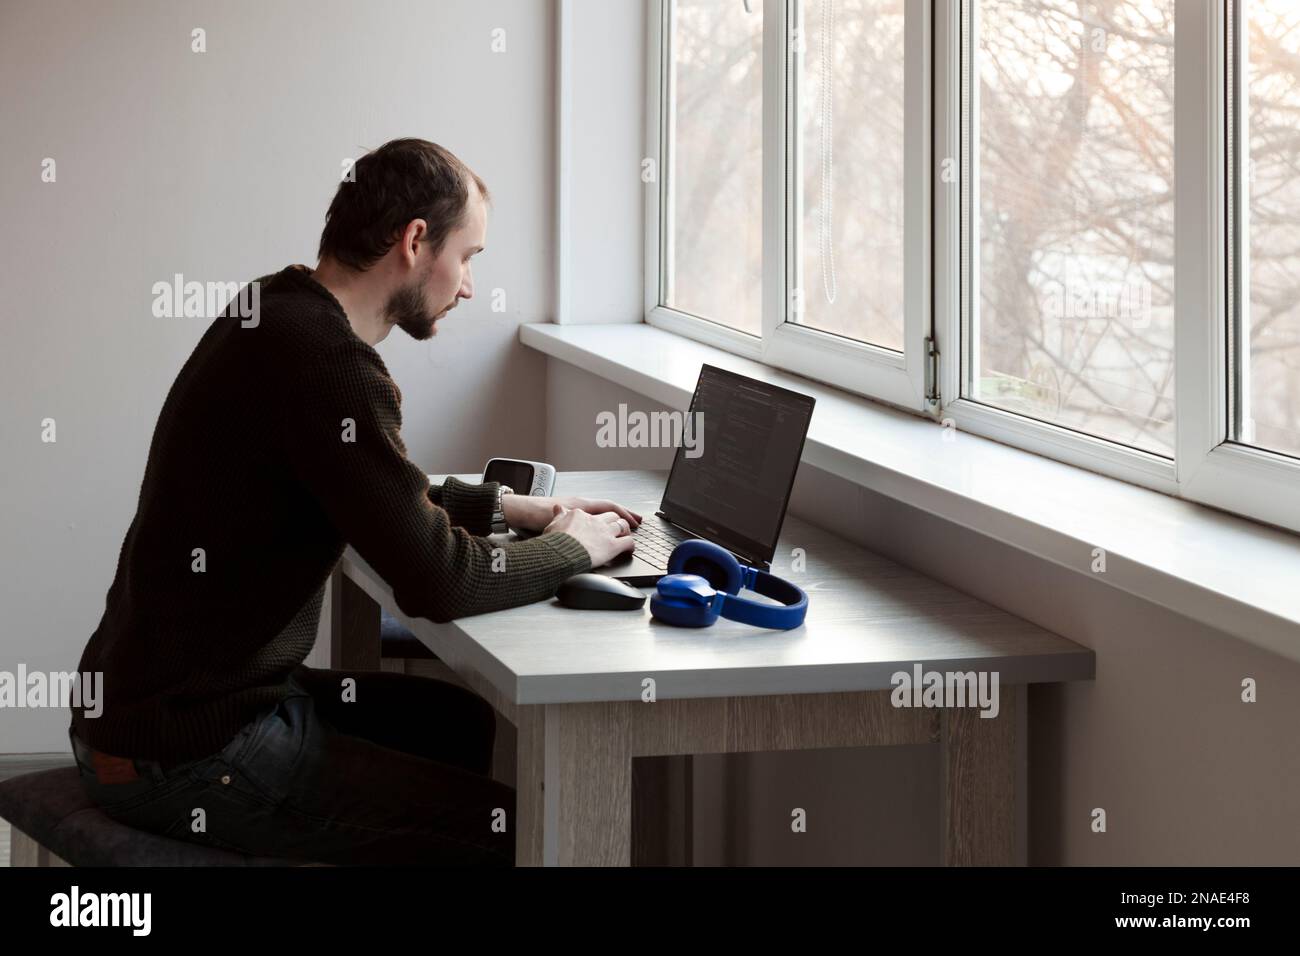 Young man working on laptop at home sitting on table Stock Photo